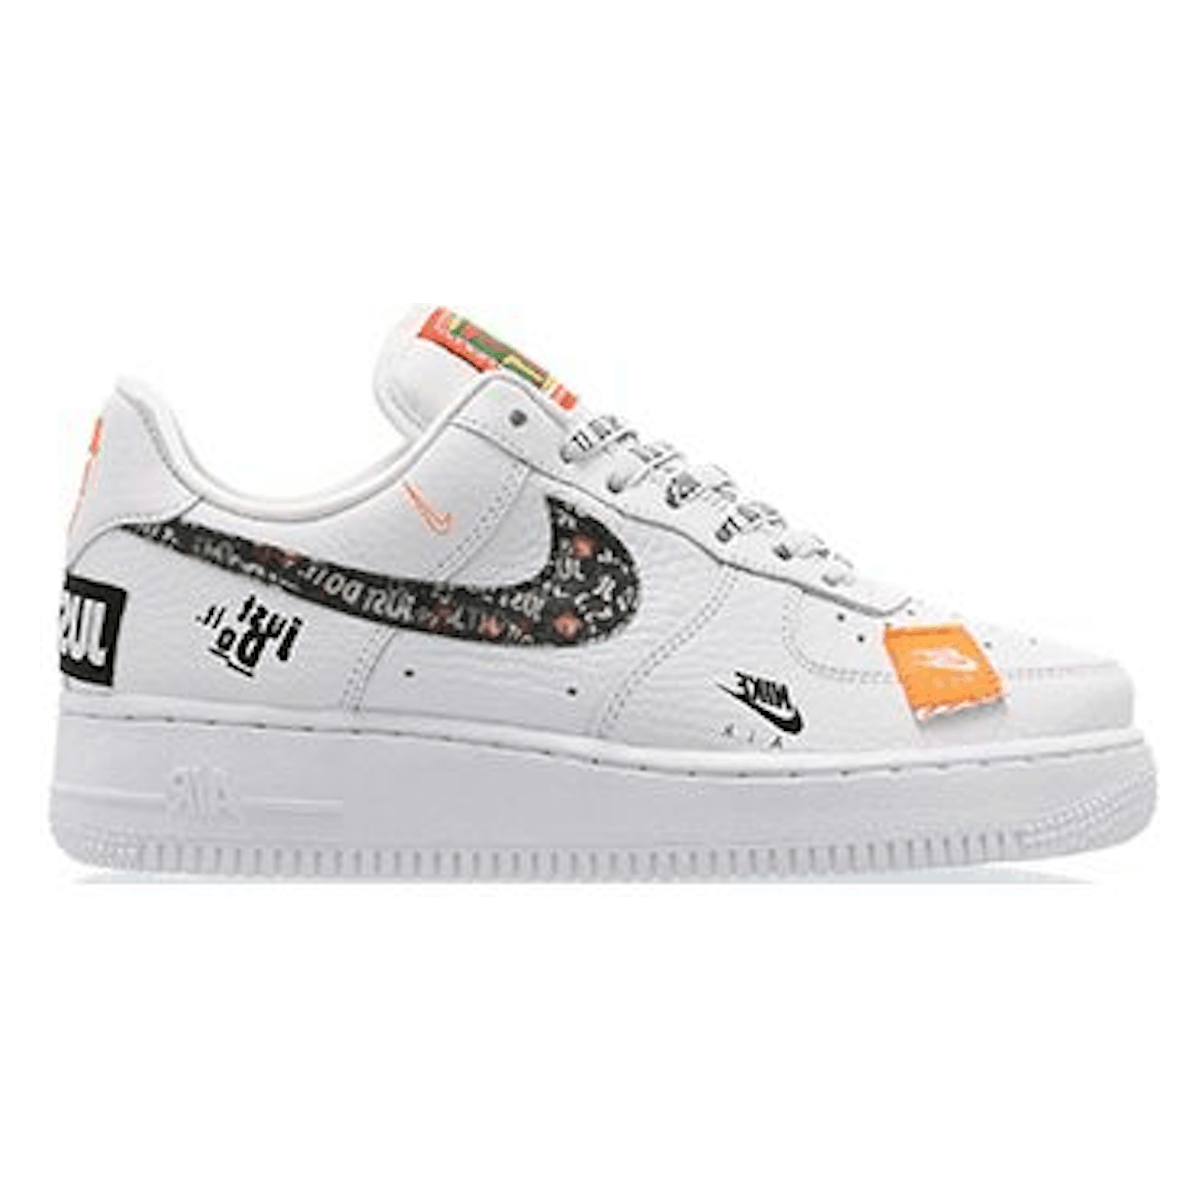 Nike Air Force 1 '07 Premium "Just Do It" White